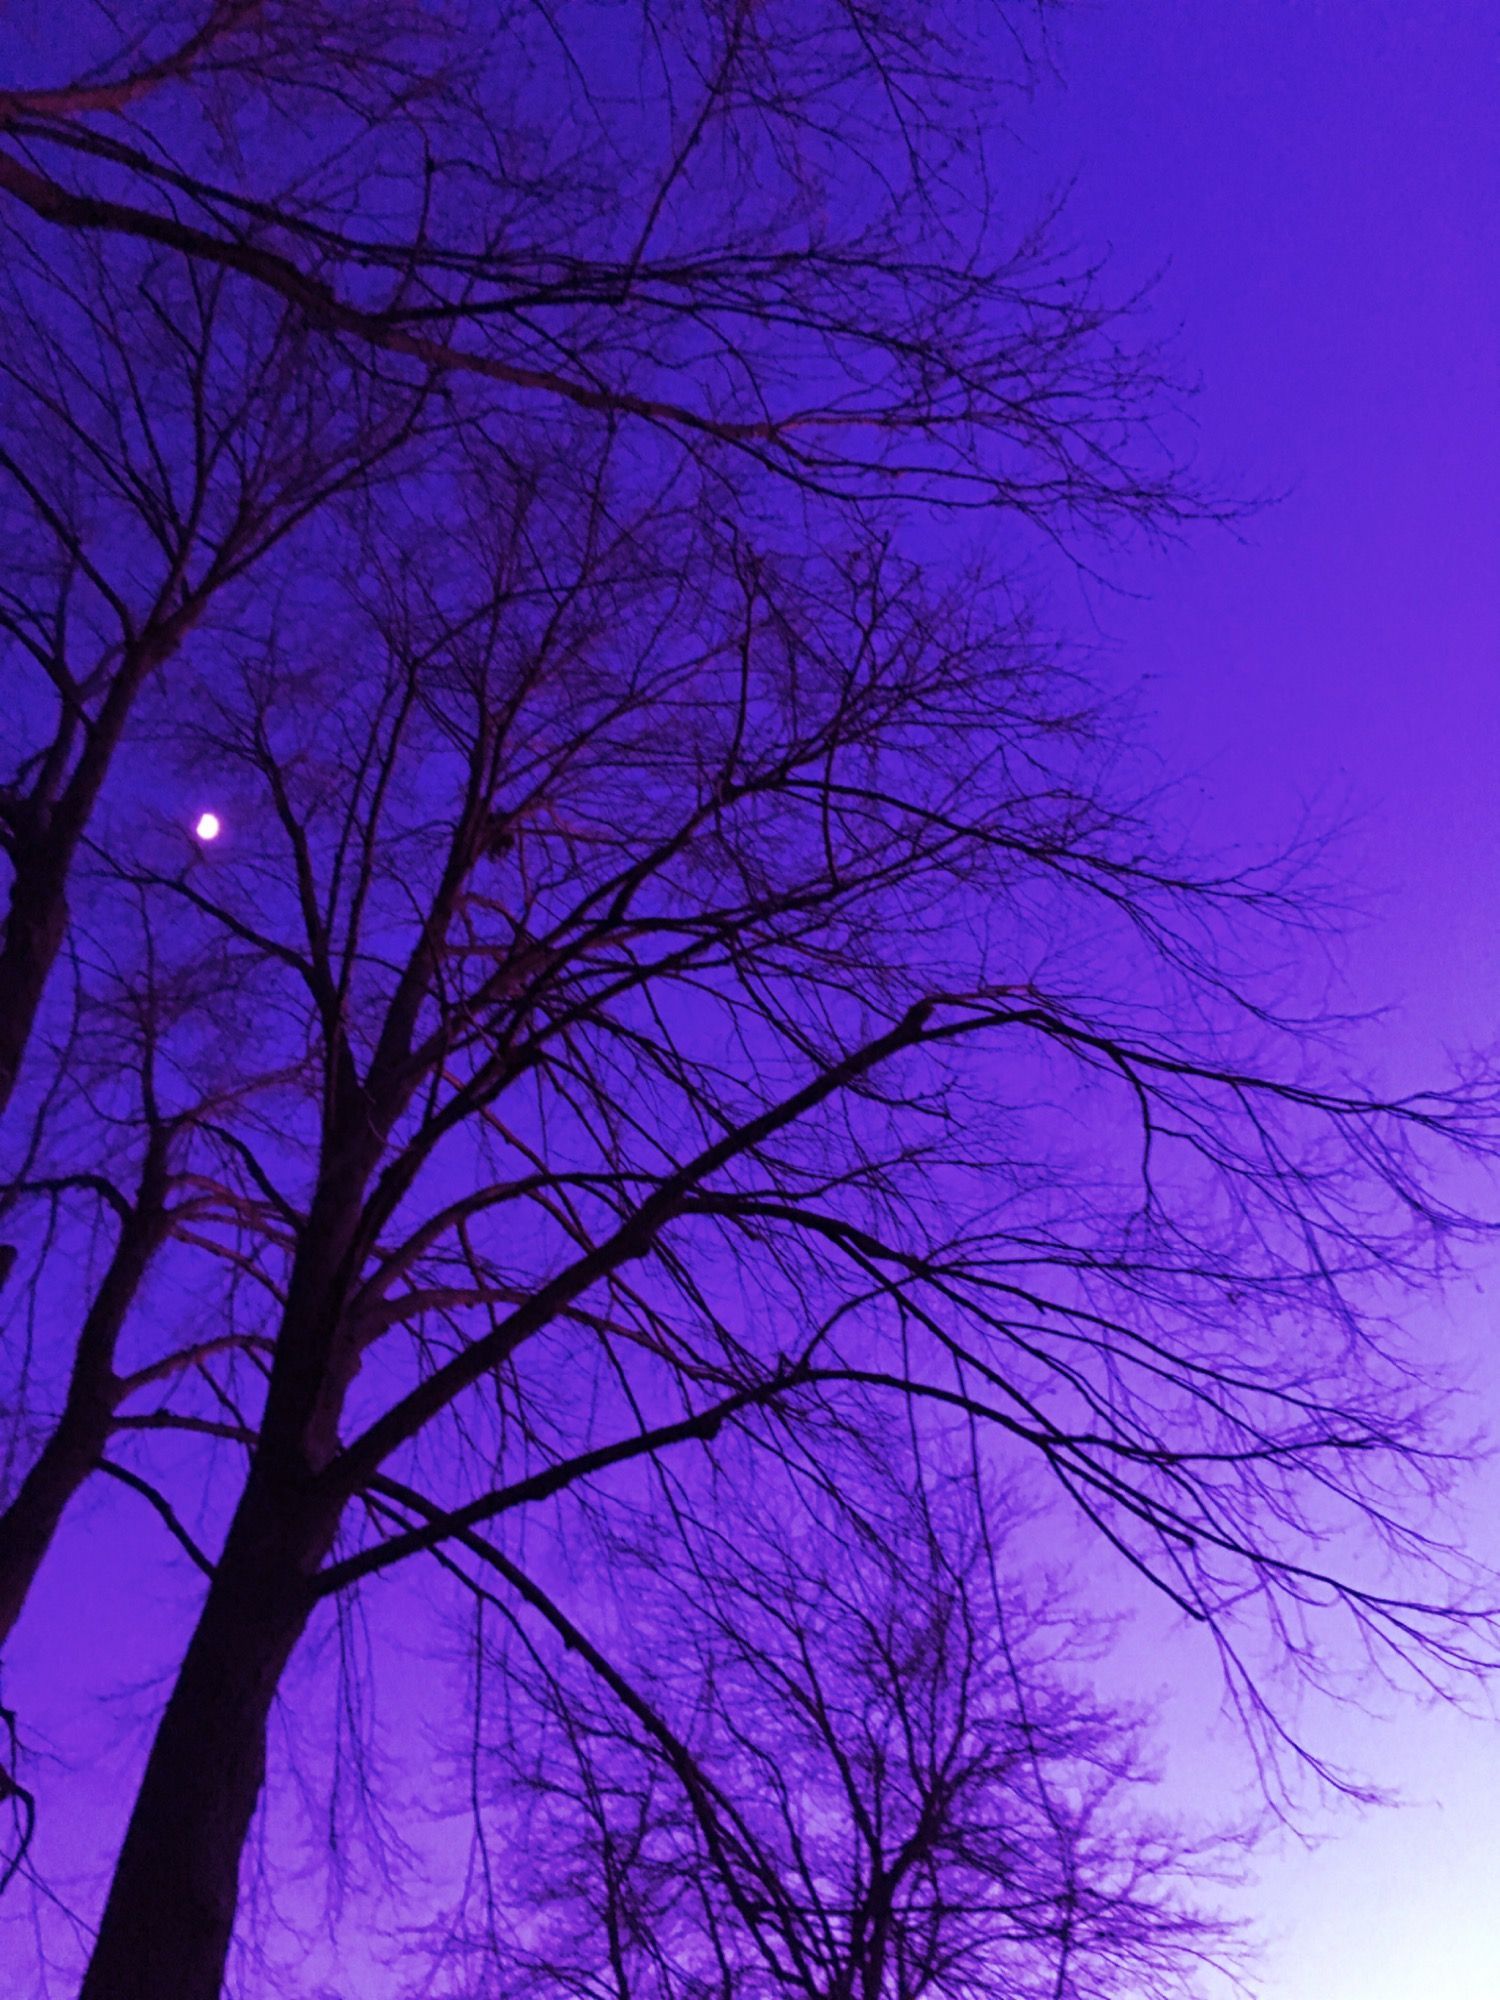 Purple Aesthetic Pictures Wallpapers